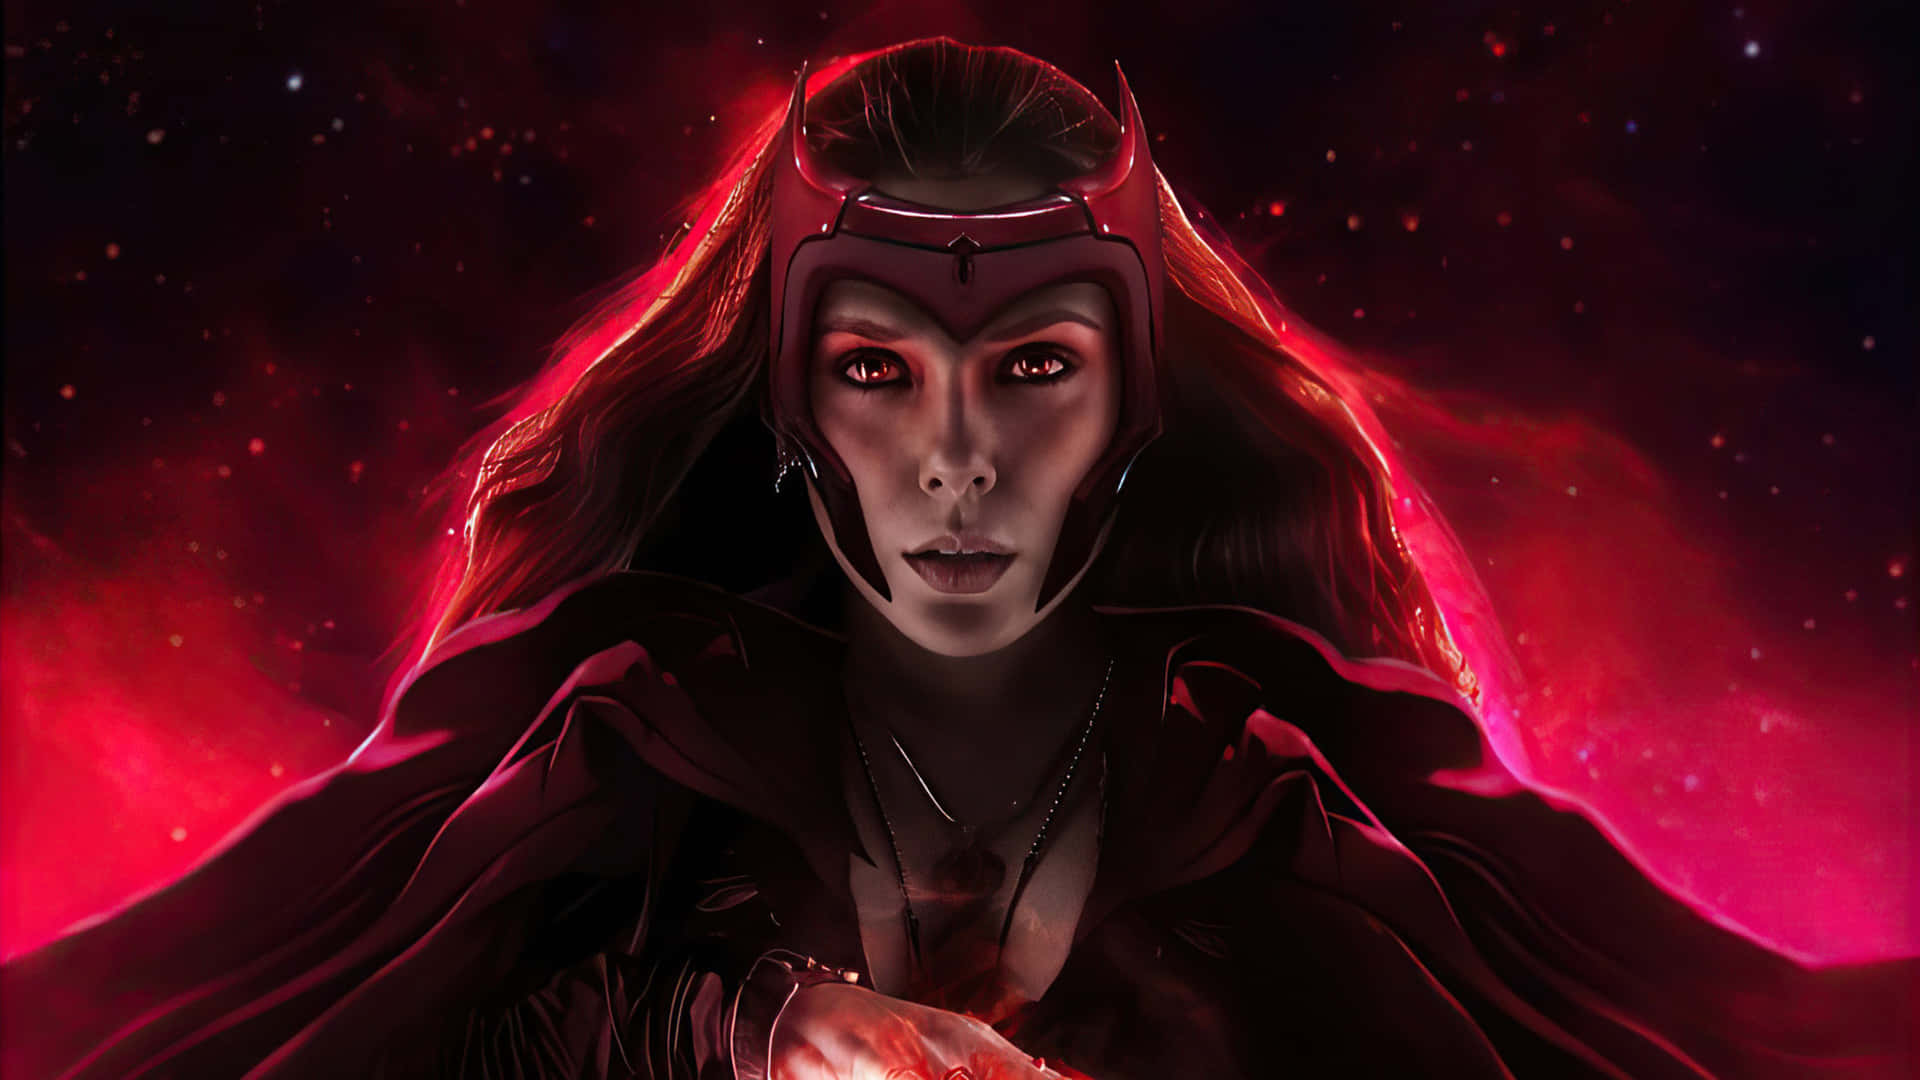 Scarlet Witch displays her impressive superpowers. Wallpaper